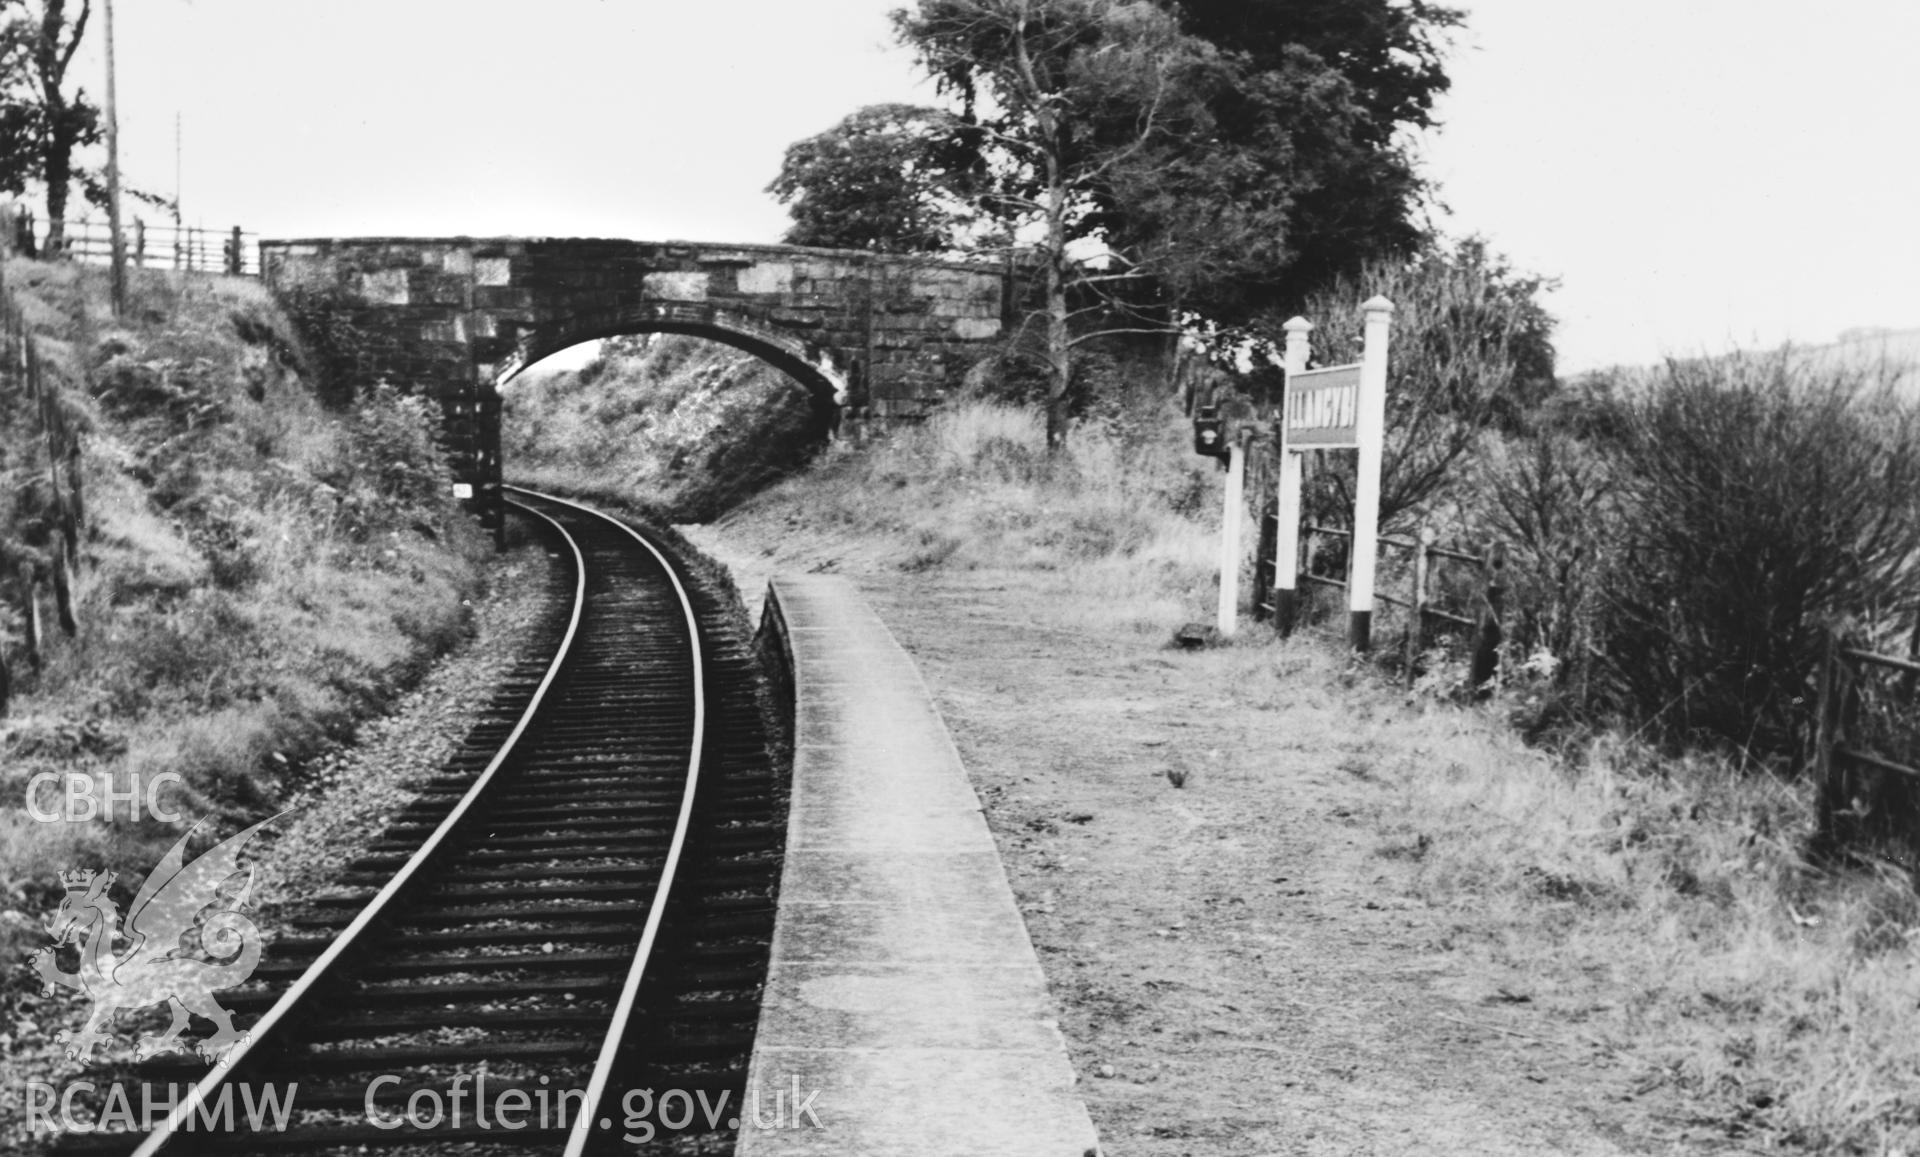 Black and white photograph, showing view of Llangybi Railway Station.